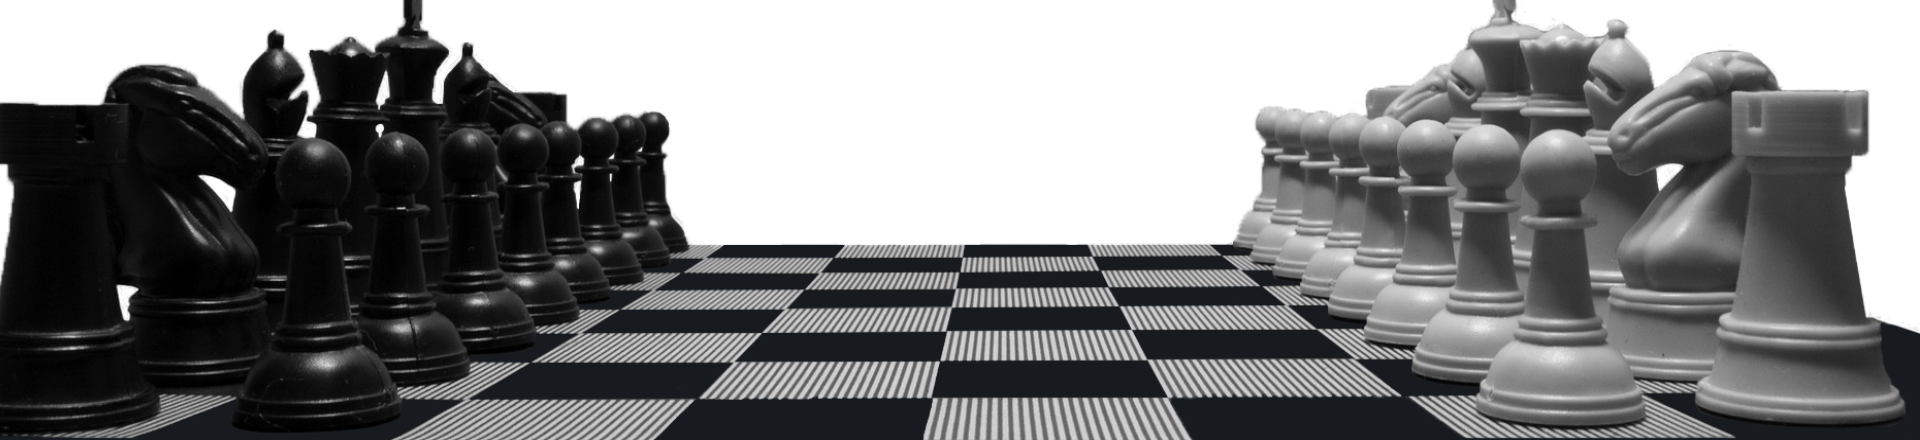 chess picture